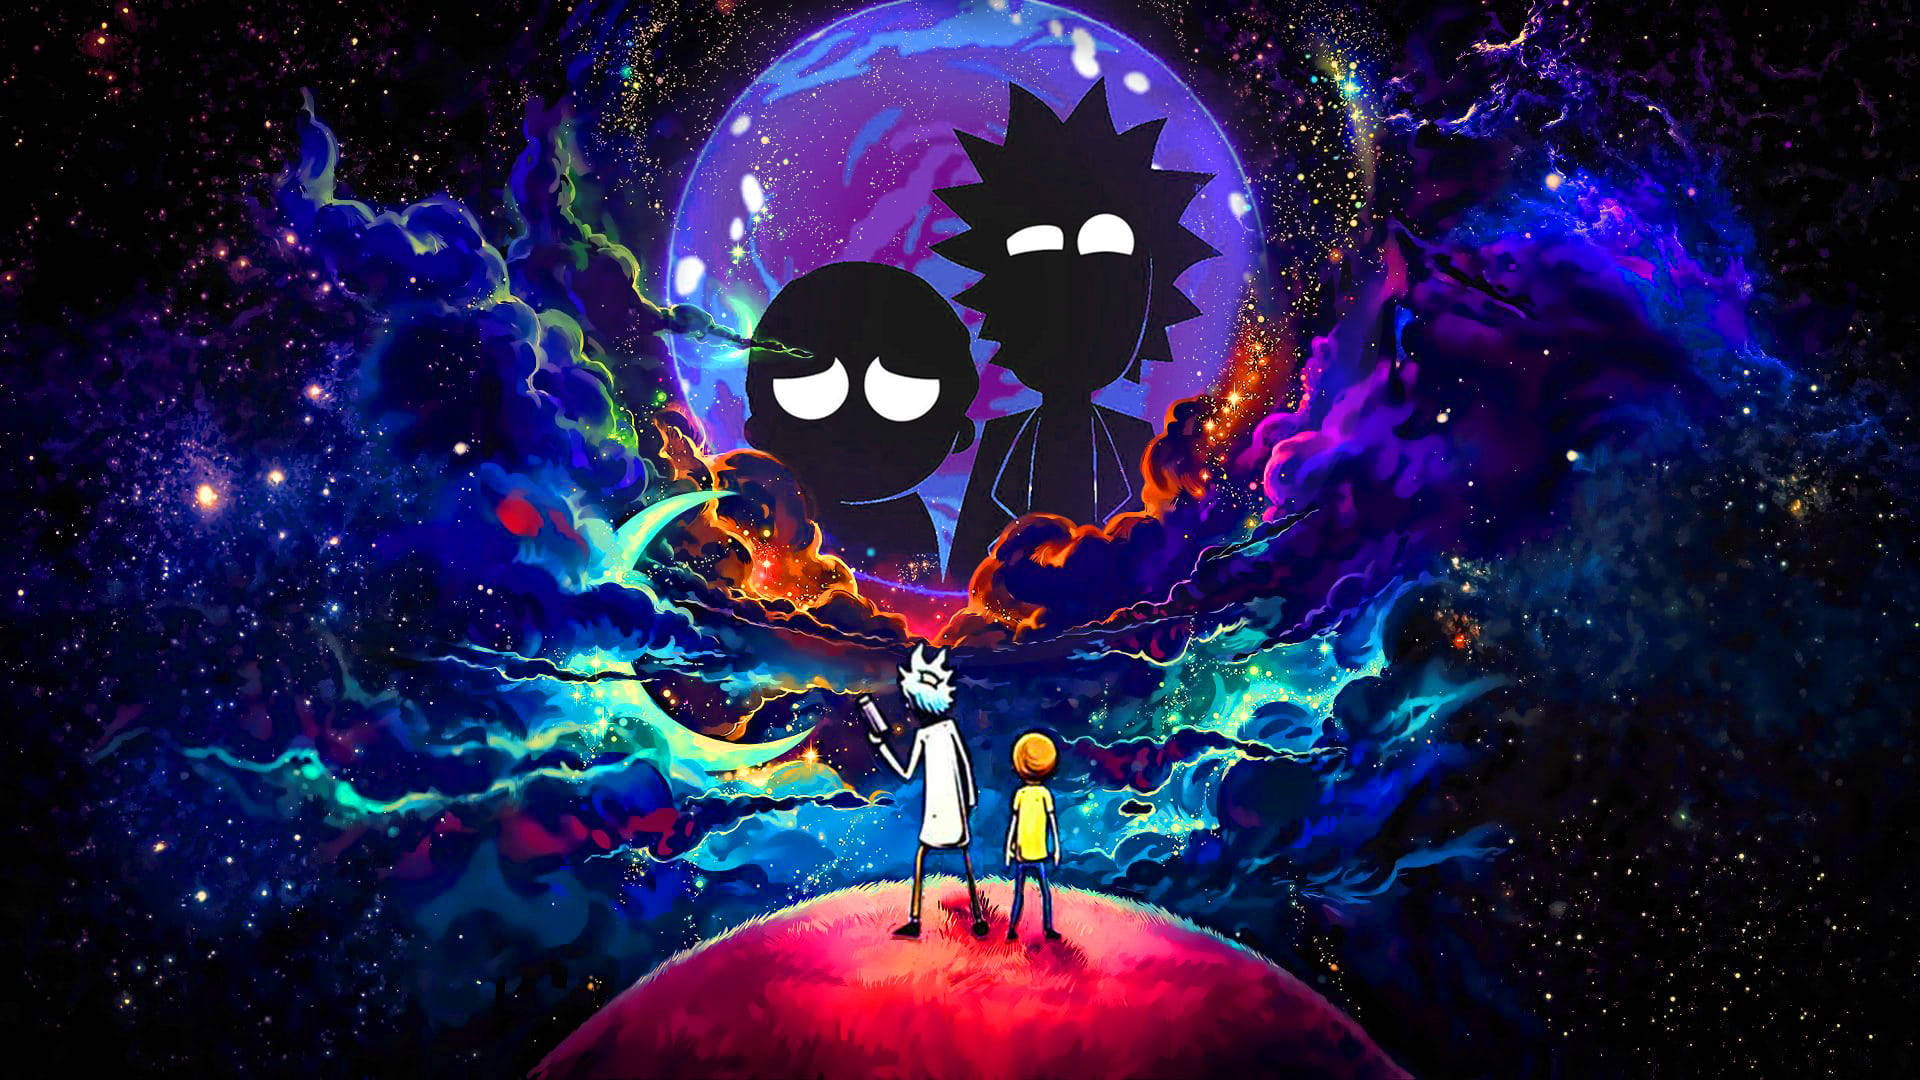 100+] Rick And Morty Cool Wallpapers | Wallpapers.Com